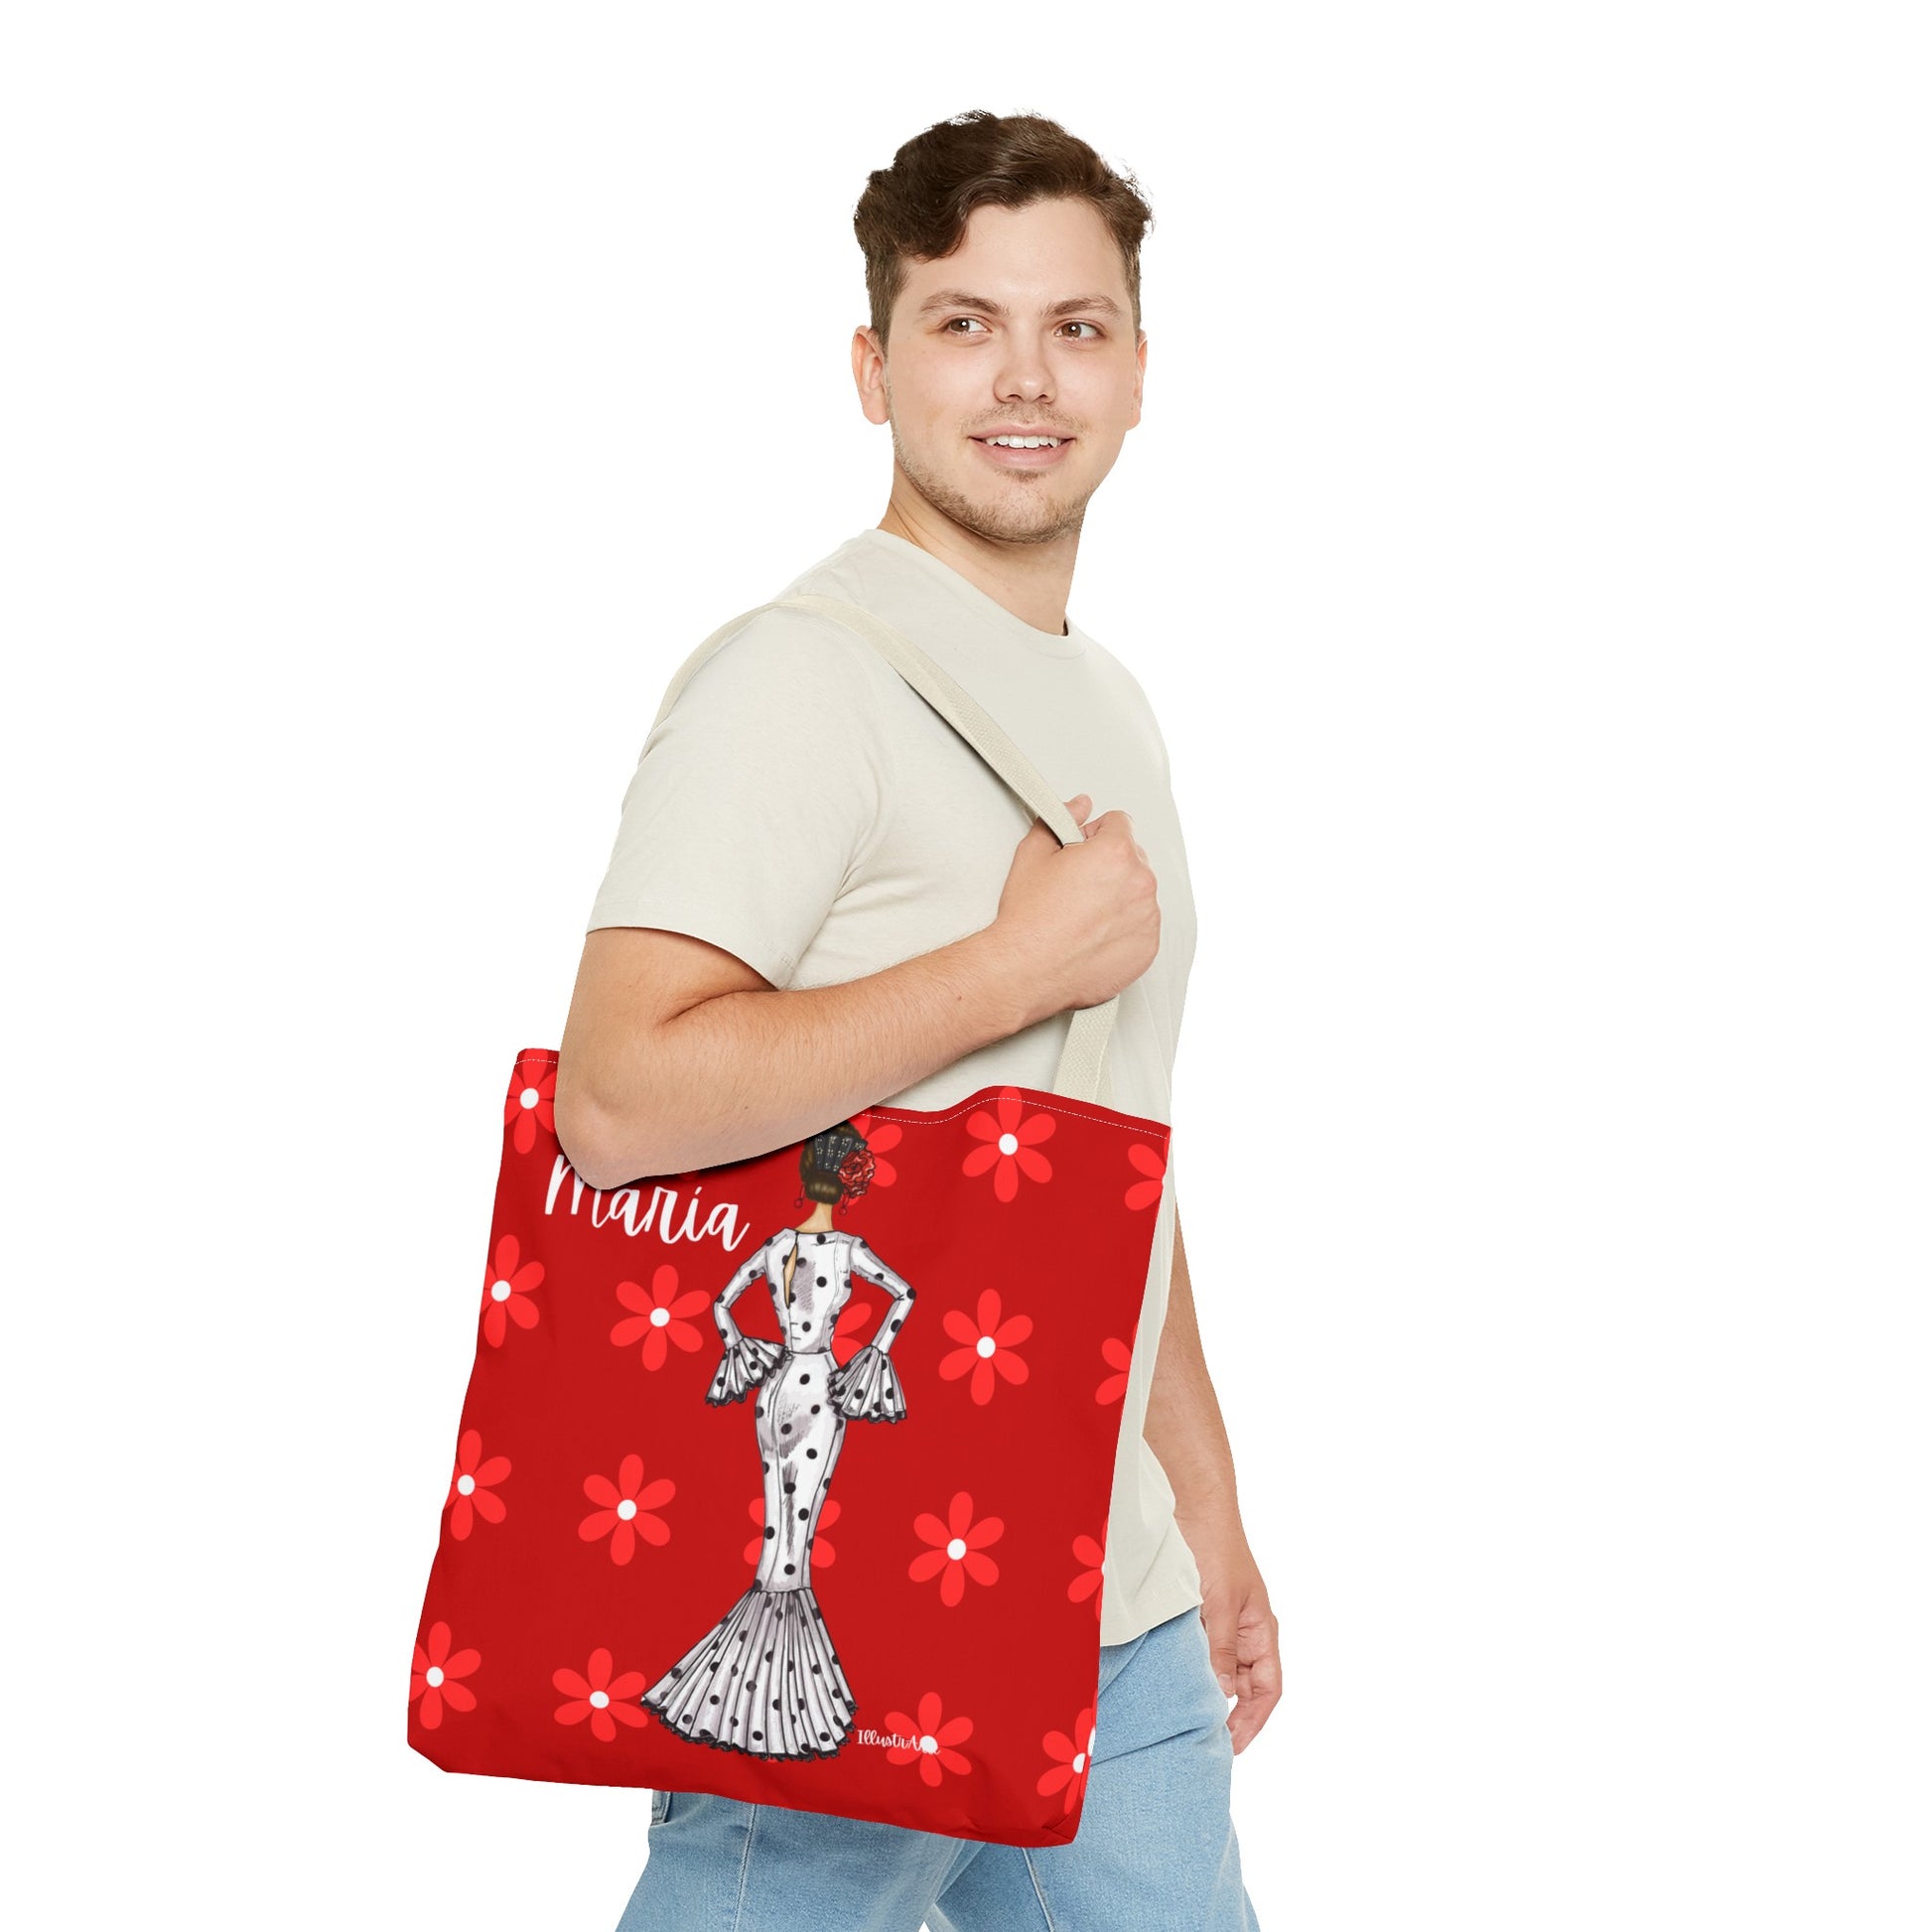 a man holding a red bag with a picture of a woman on it